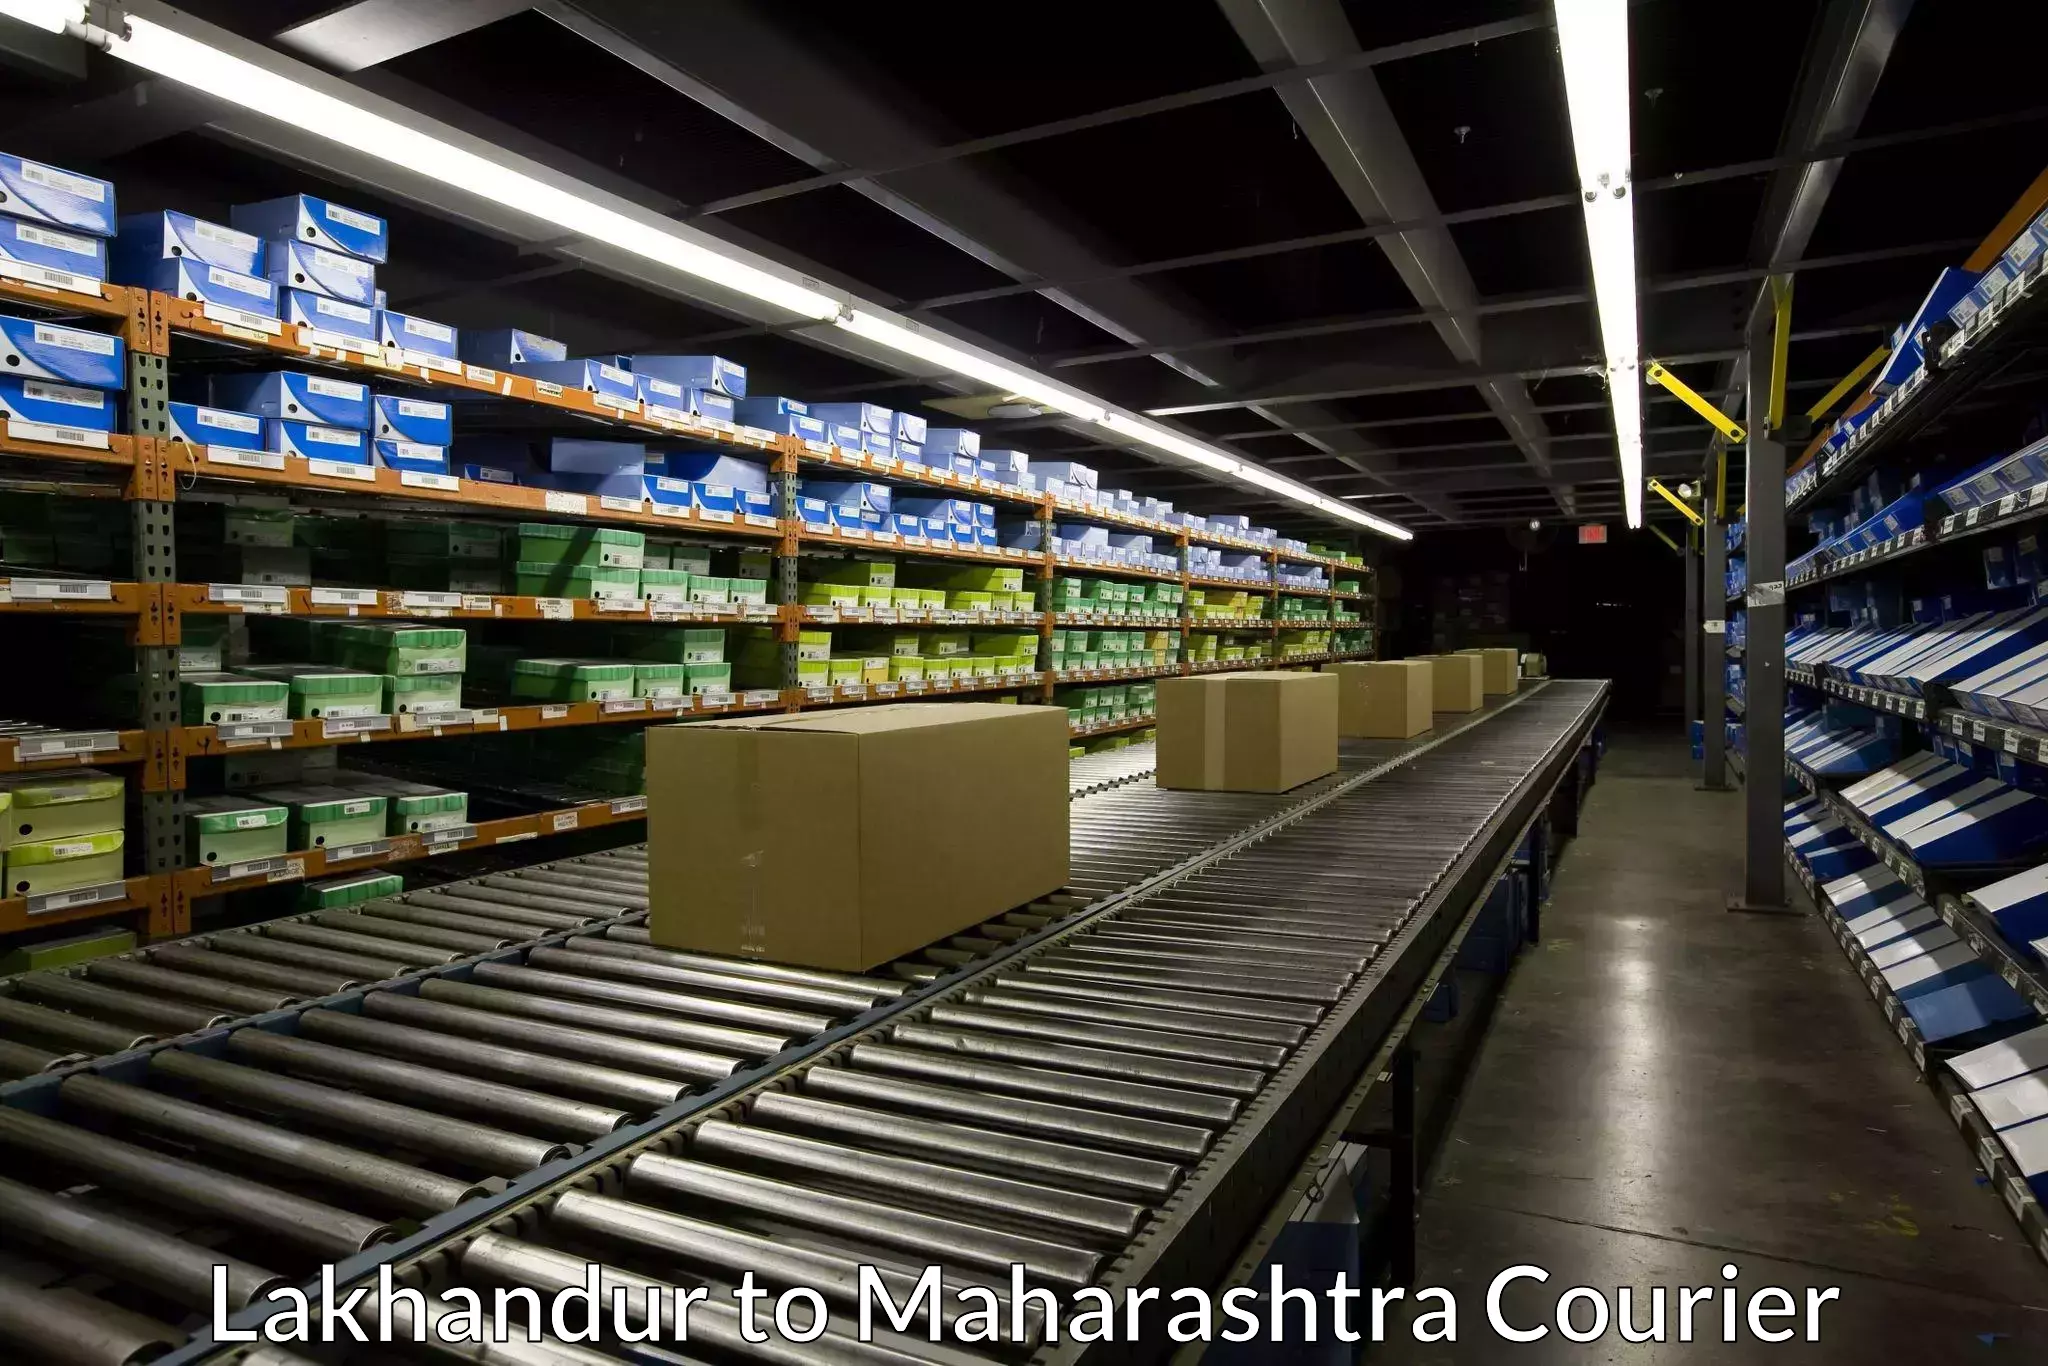 Nationwide shipping services in Lakhandur to IIT Mumbai